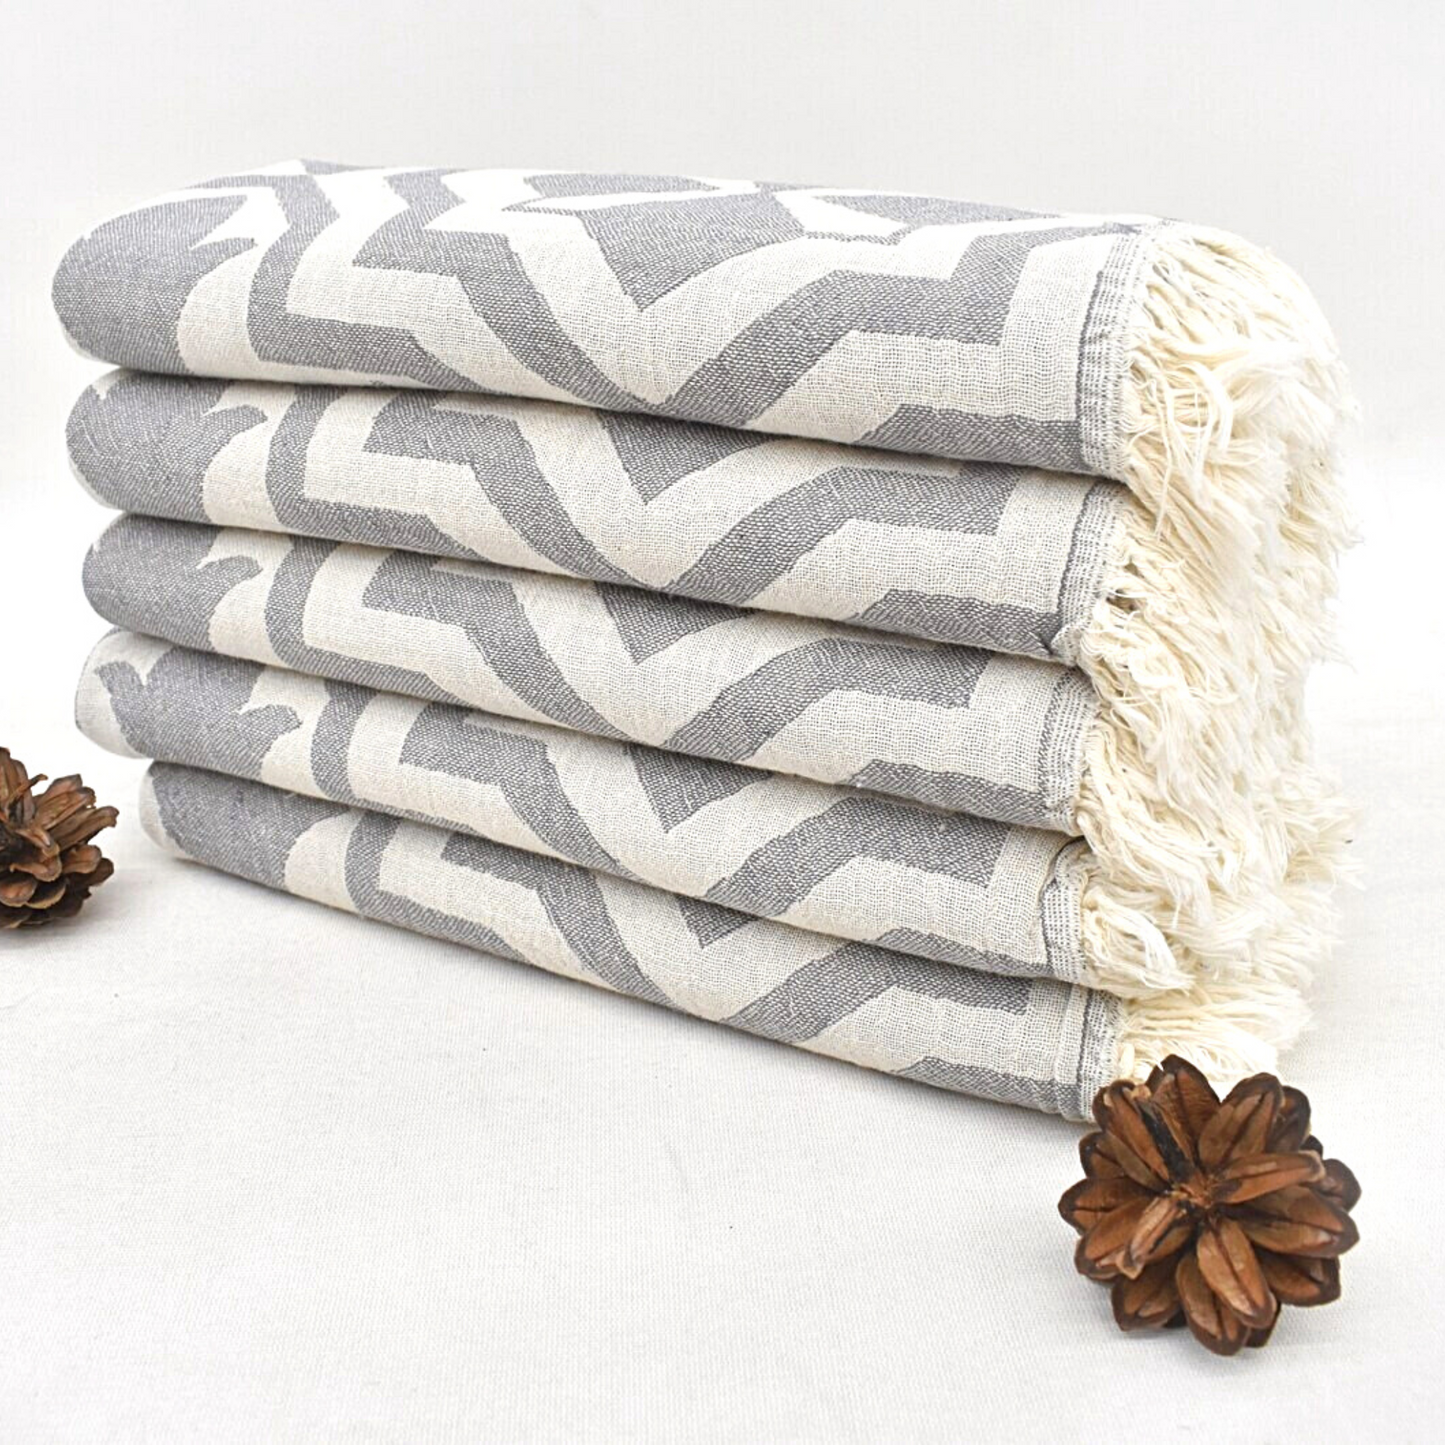 Stacked grey TULIP Turkish Kitchen Towels and pine cones